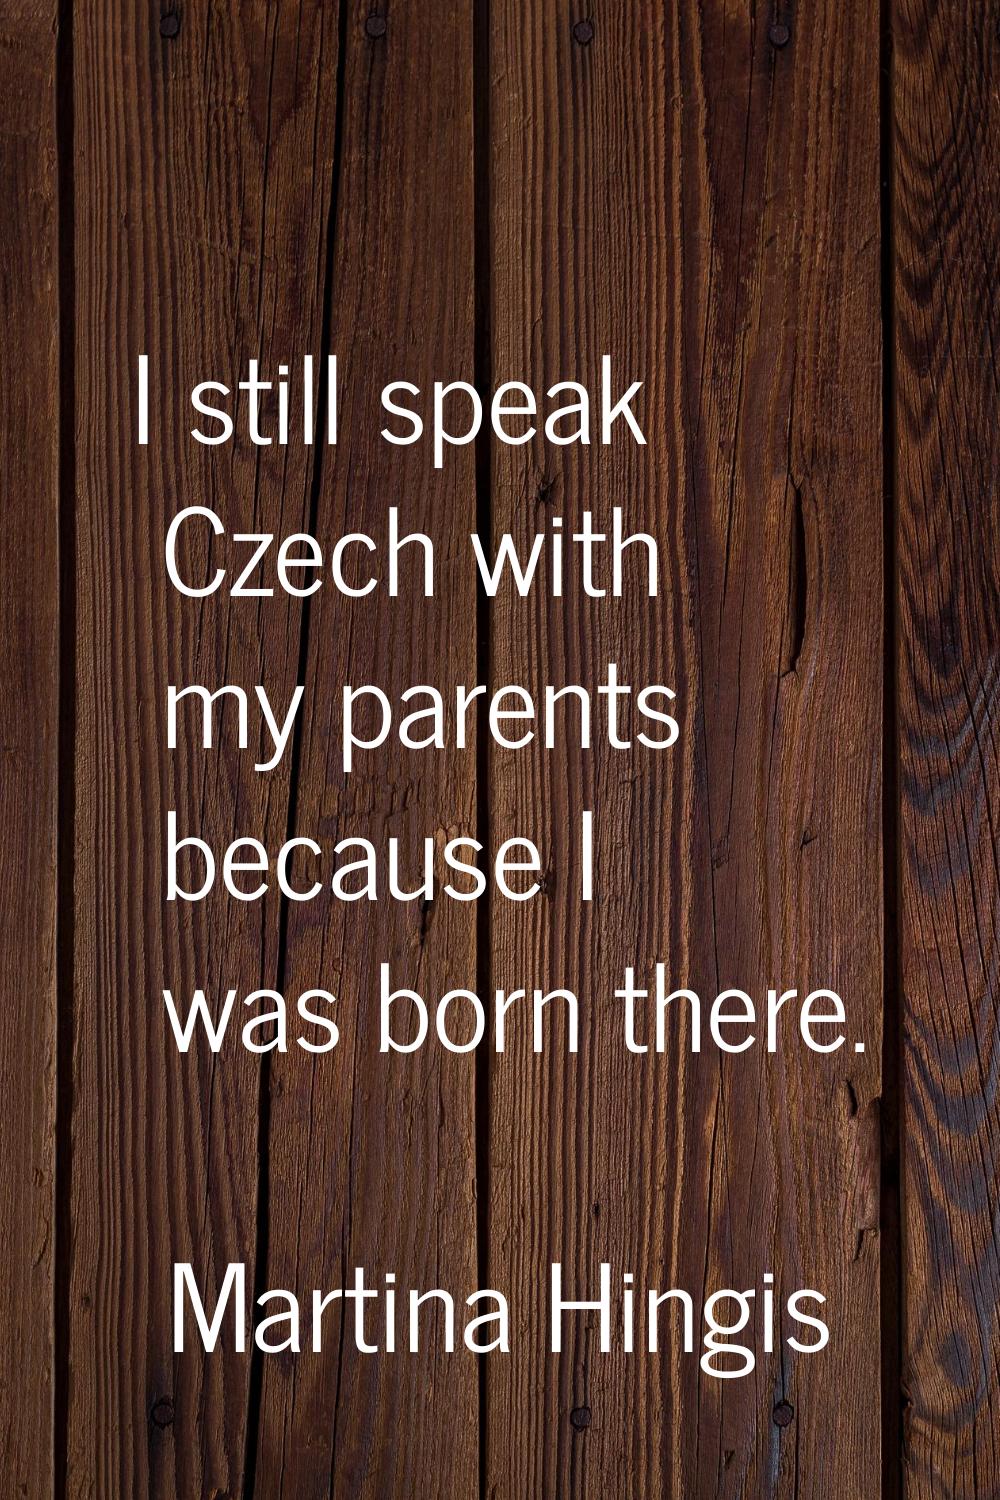 I still speak Czech with my parents because I was born there.